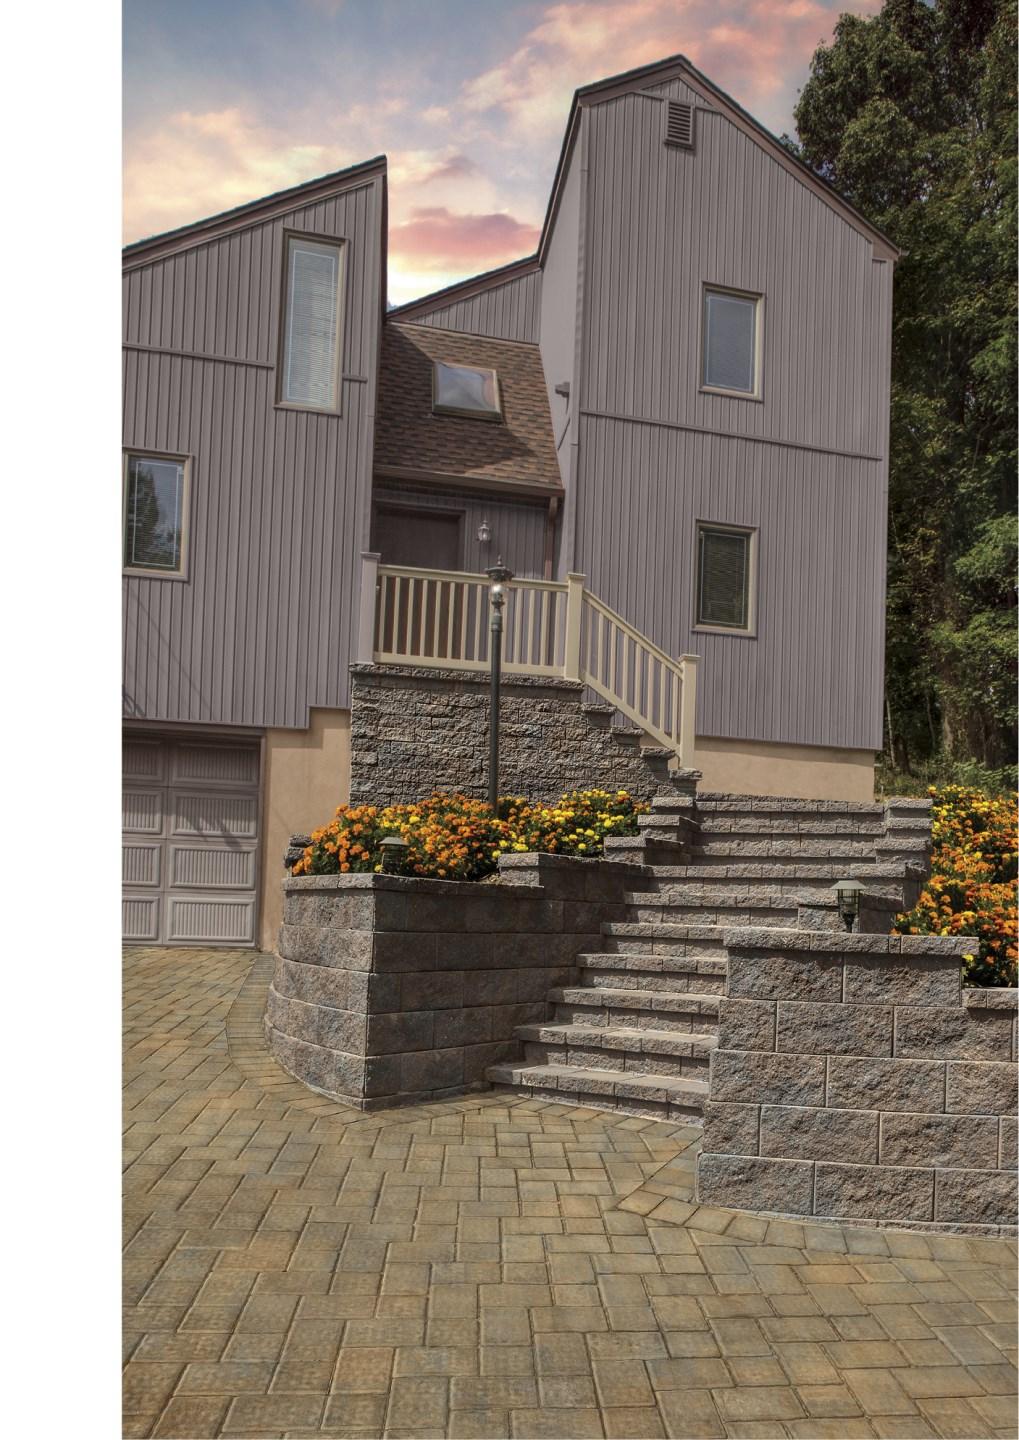 Mortarless Segmental Retaining Walls installed in North America surpass every country world-wide.